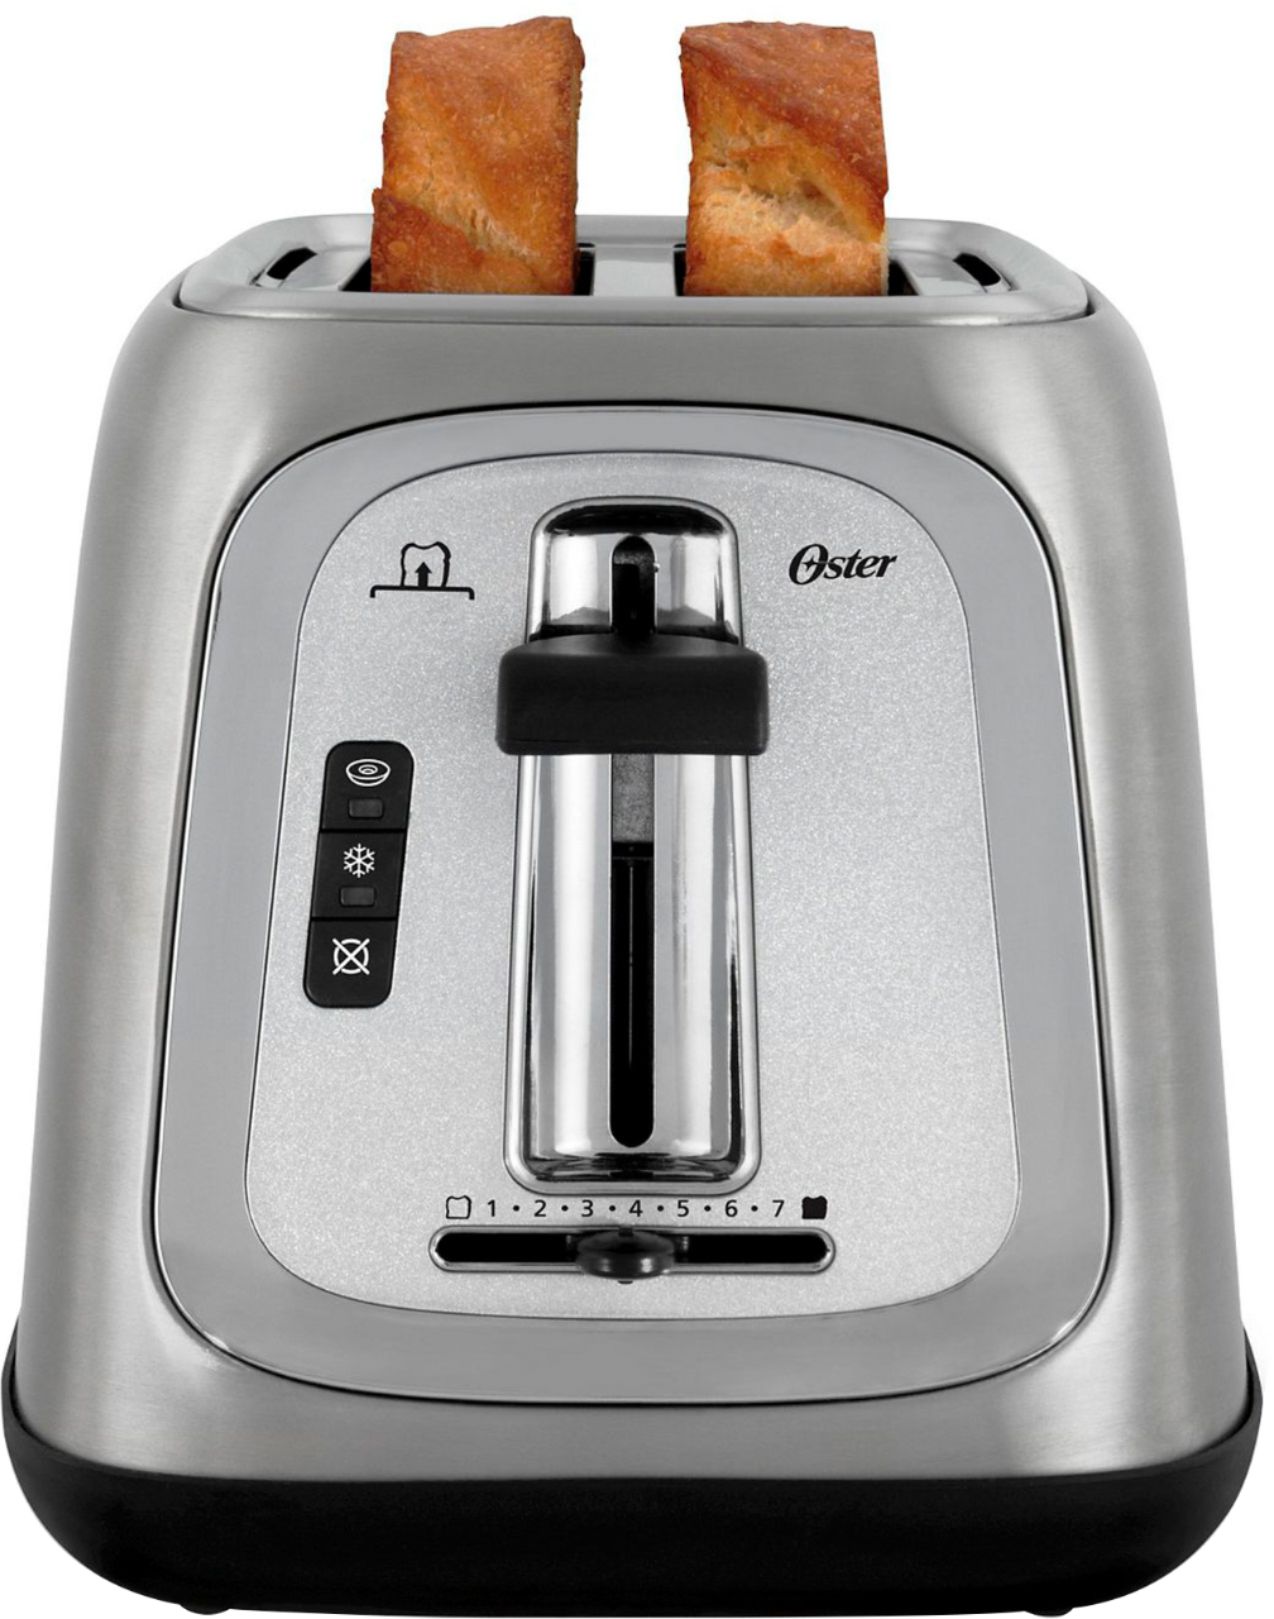 Oster 2 Slice Toaster With Extra-wide Slots In Brushed Stainless